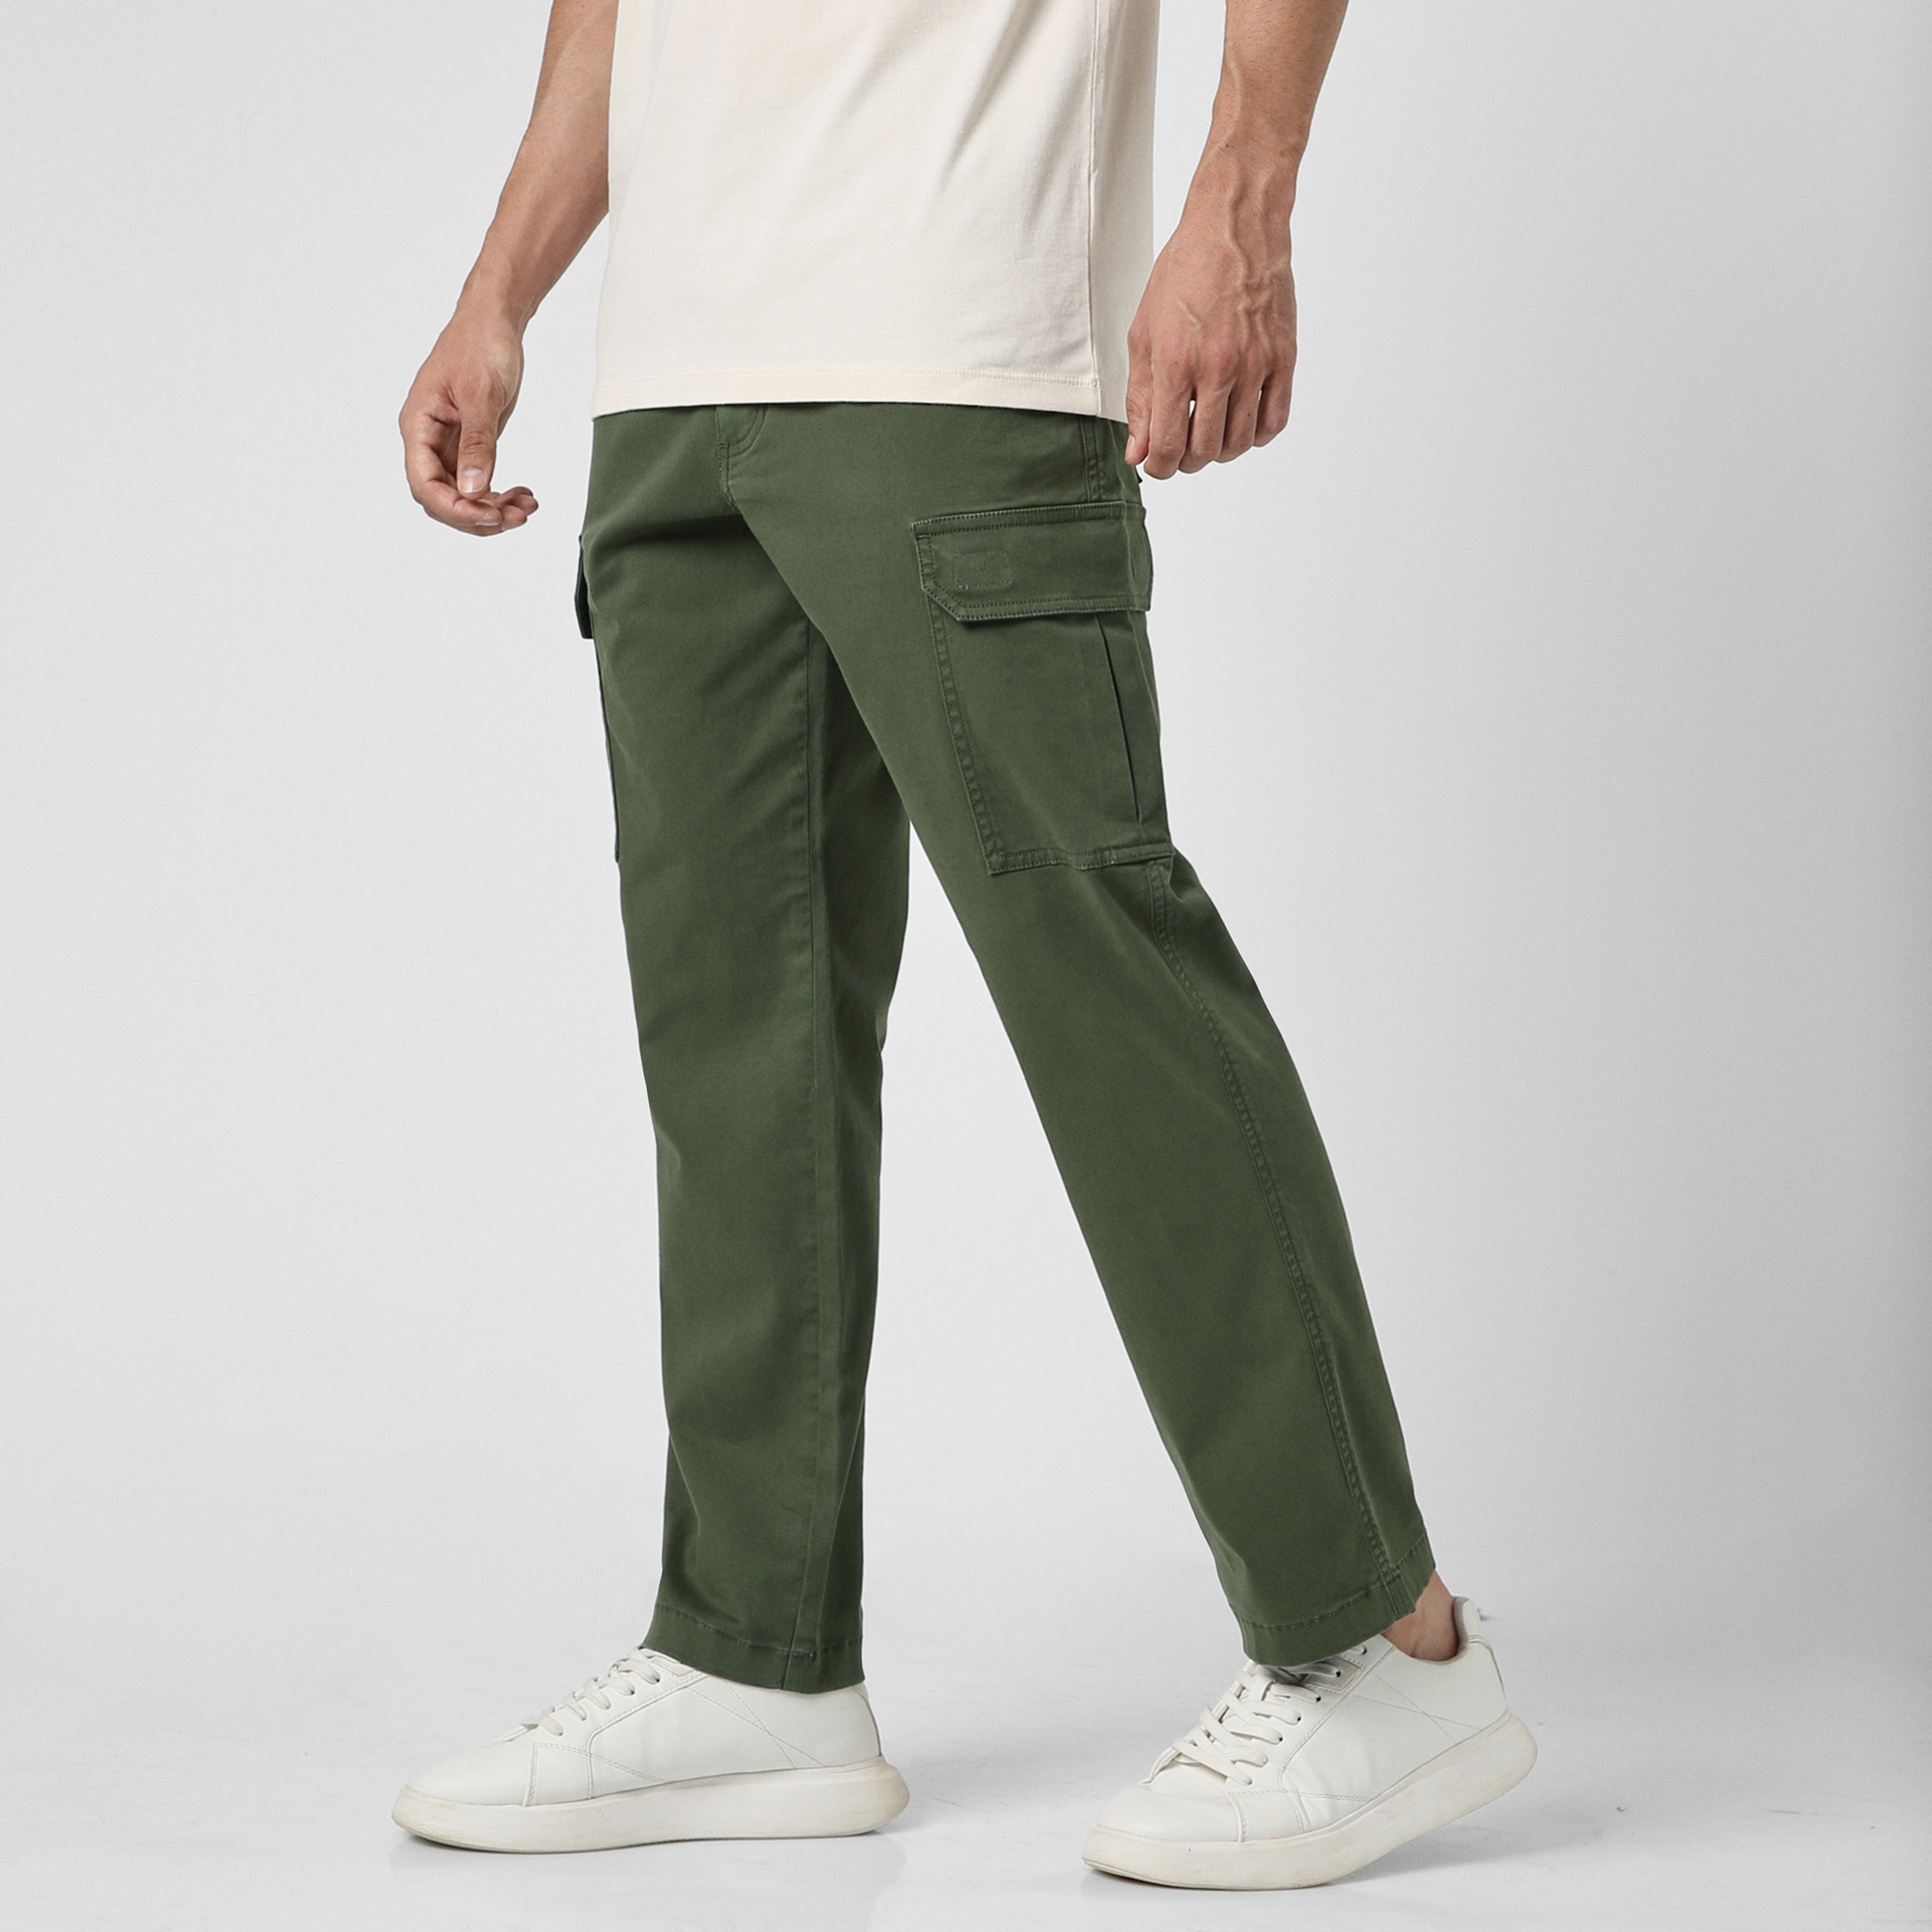 Men's Stretch Cargo Pant  Bearbottom – Bearbottom Clothing